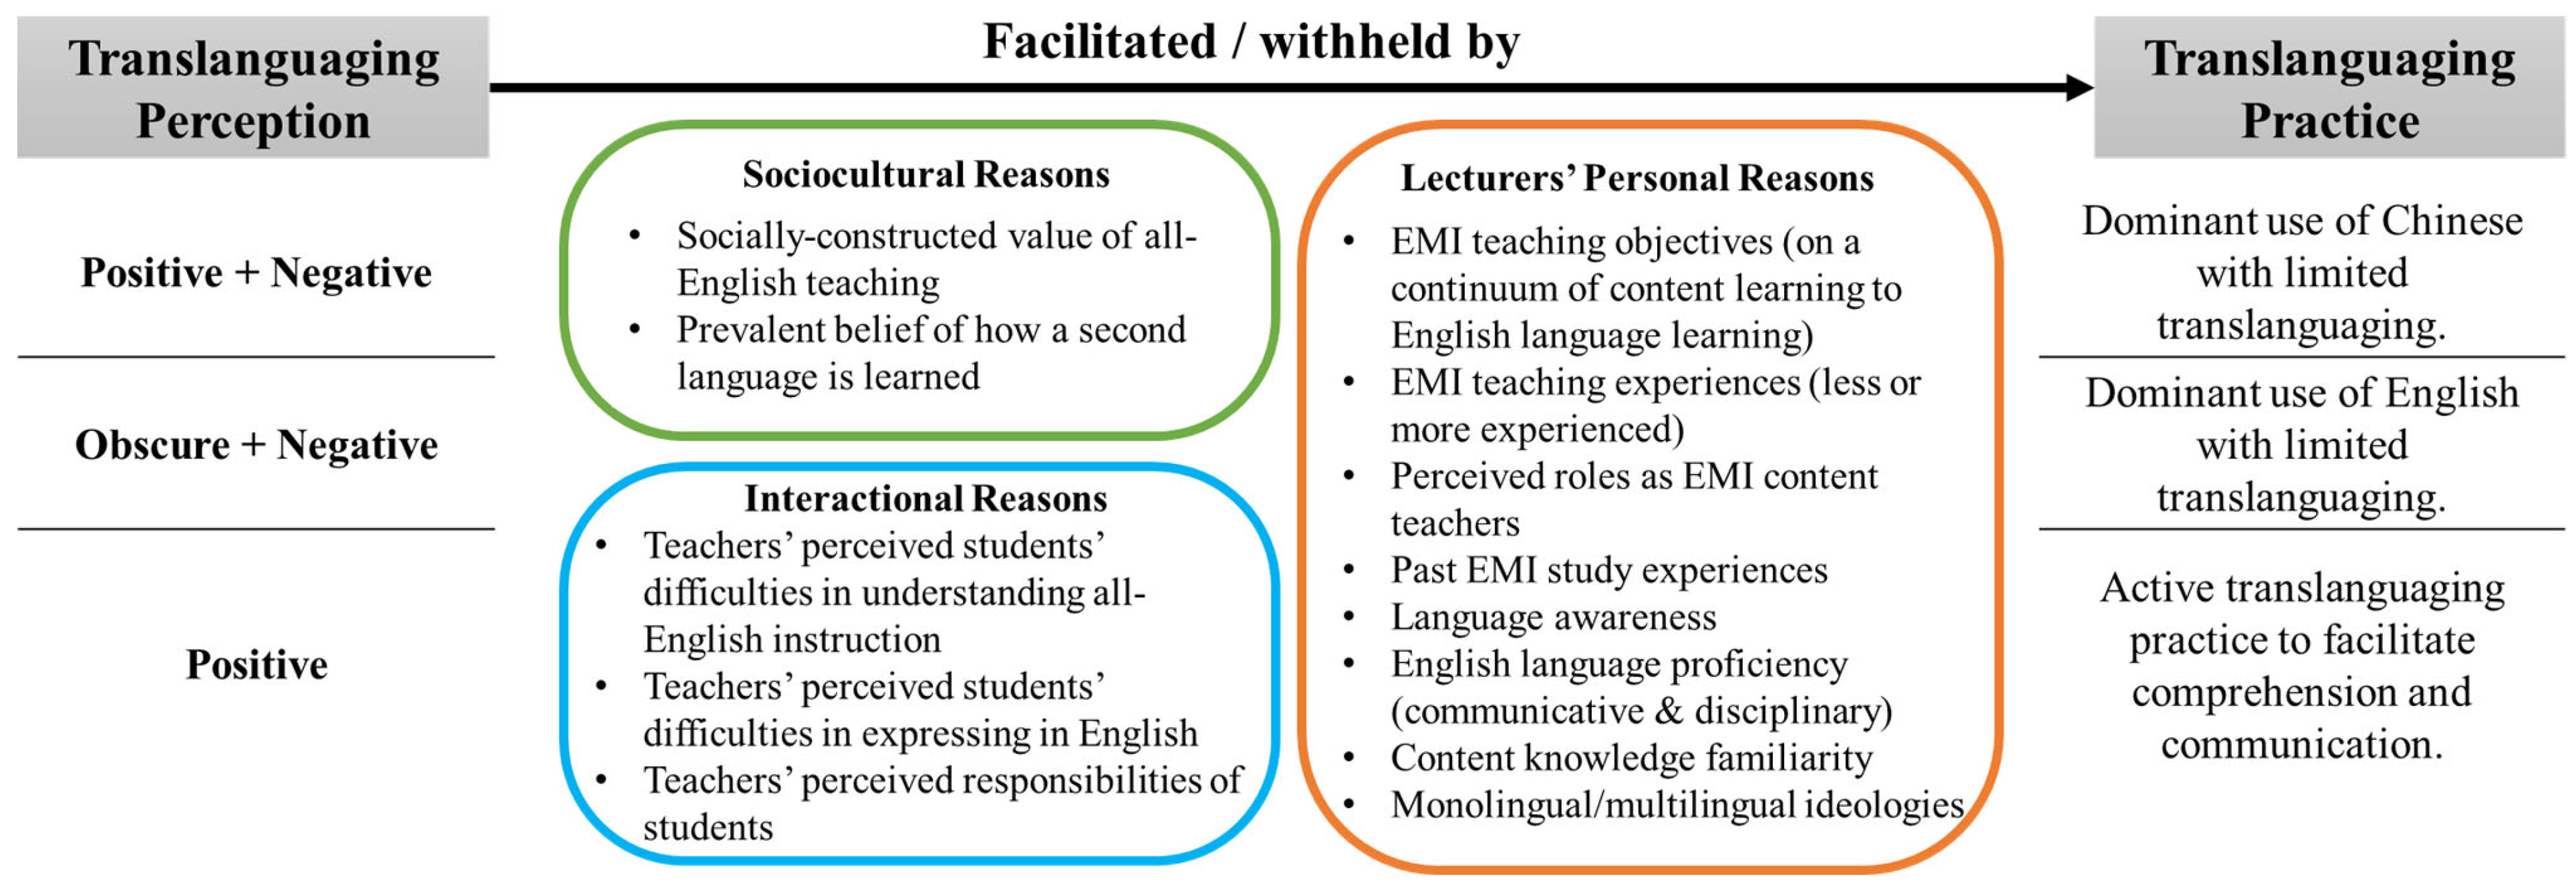 Codeswitching in primary mathematics lessons: sociocultural